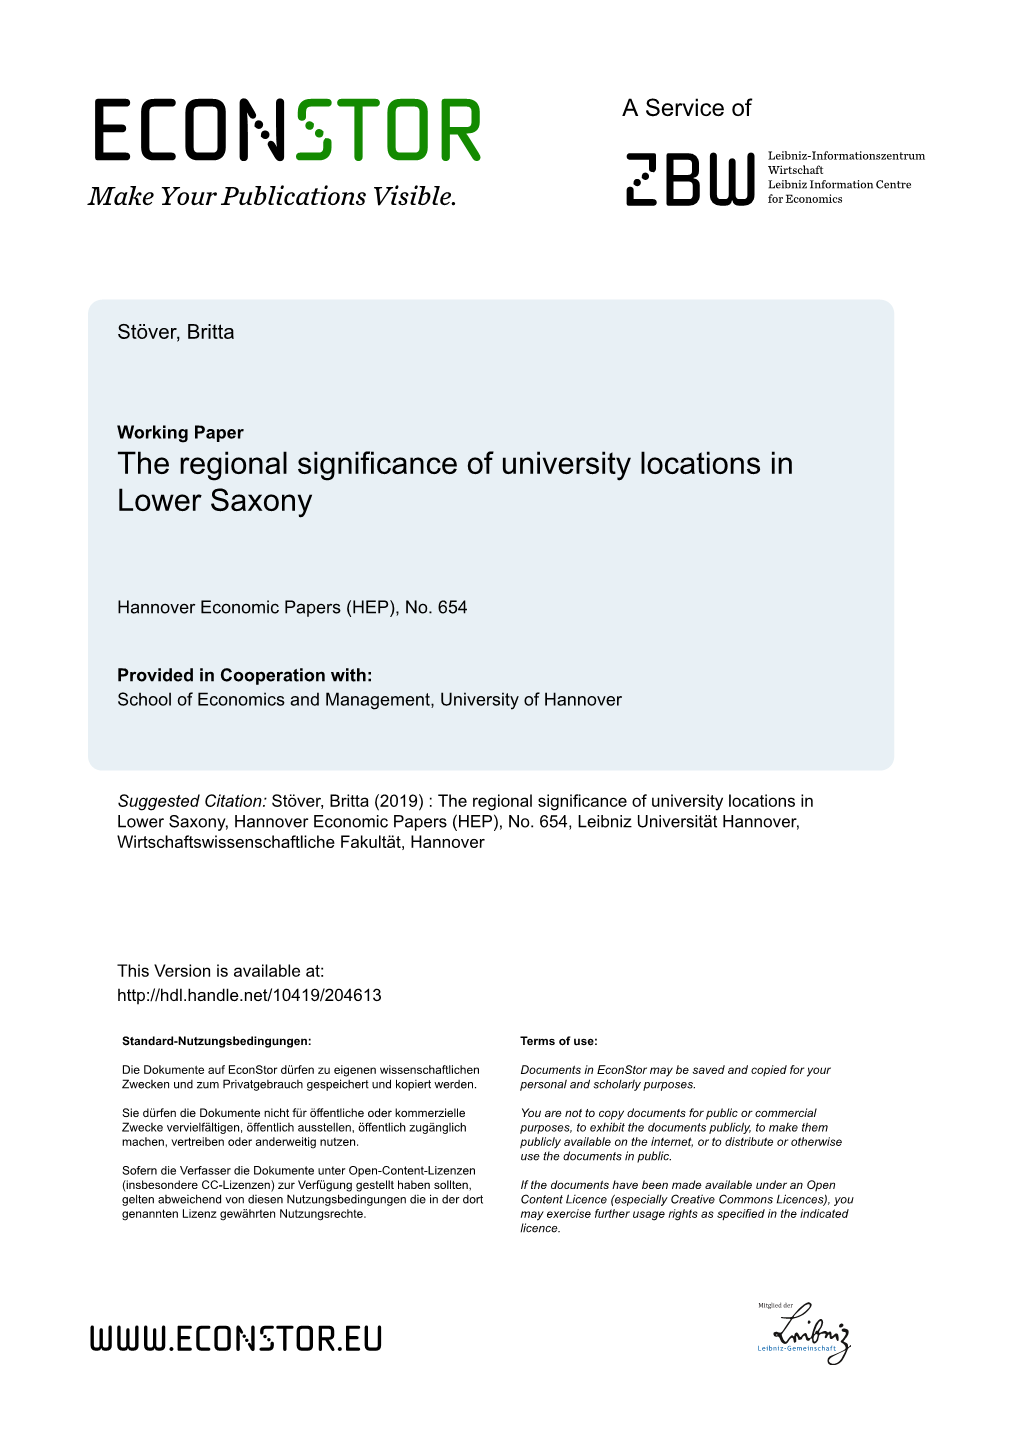 The Regional Significance of University Locations in Lower Saxony